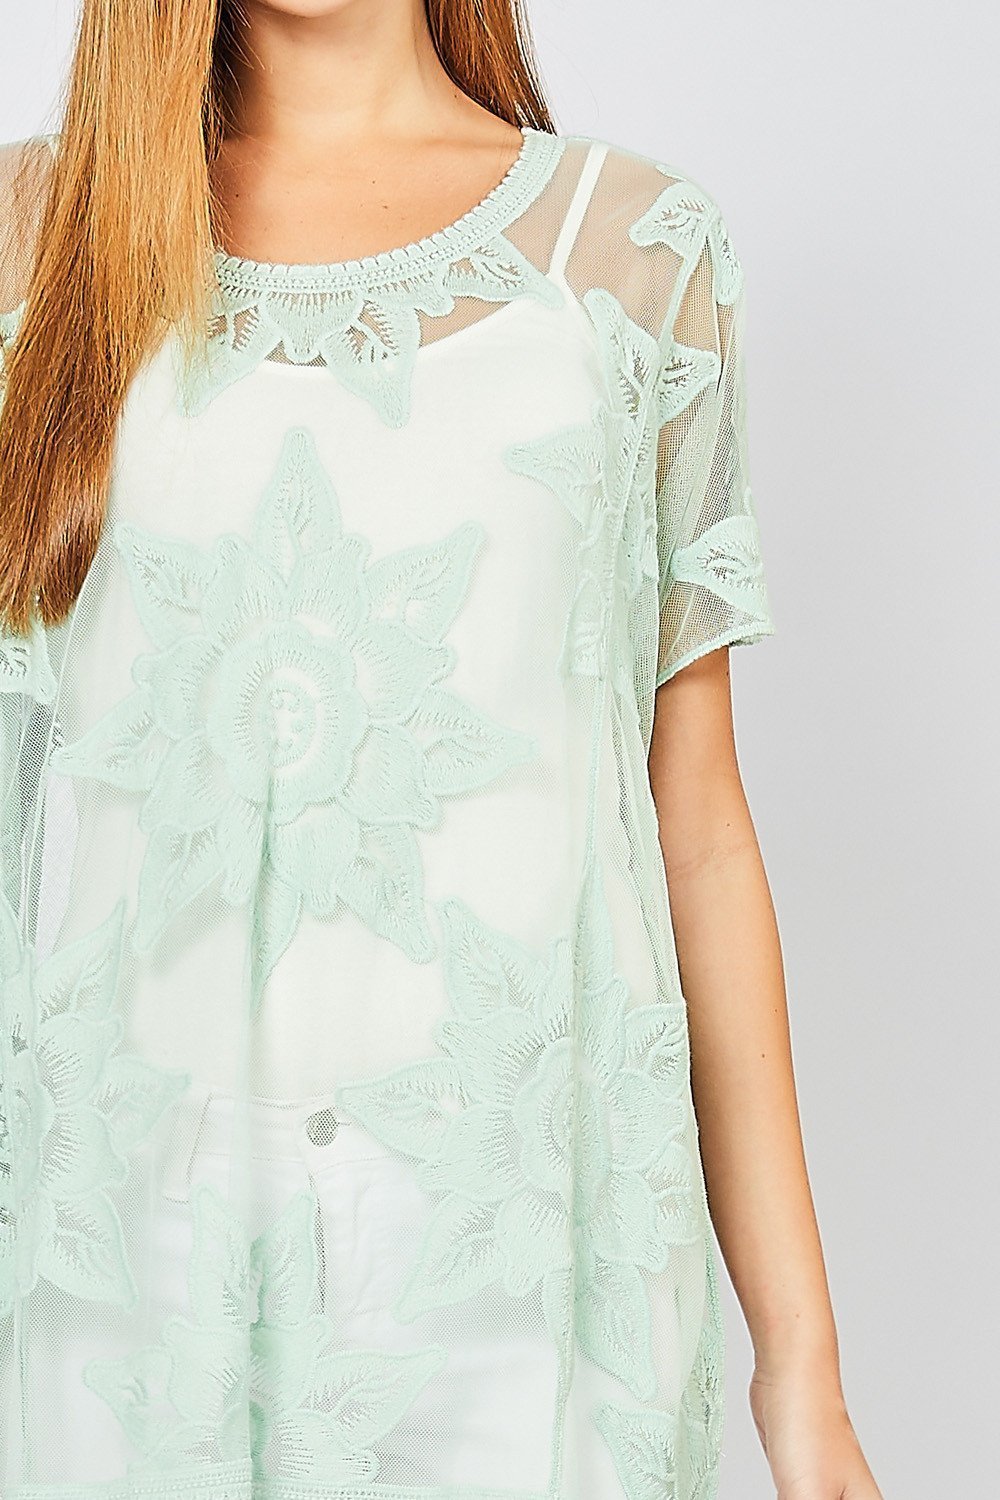 Sheer Floral Crochet Lace Tunic Top by Entro